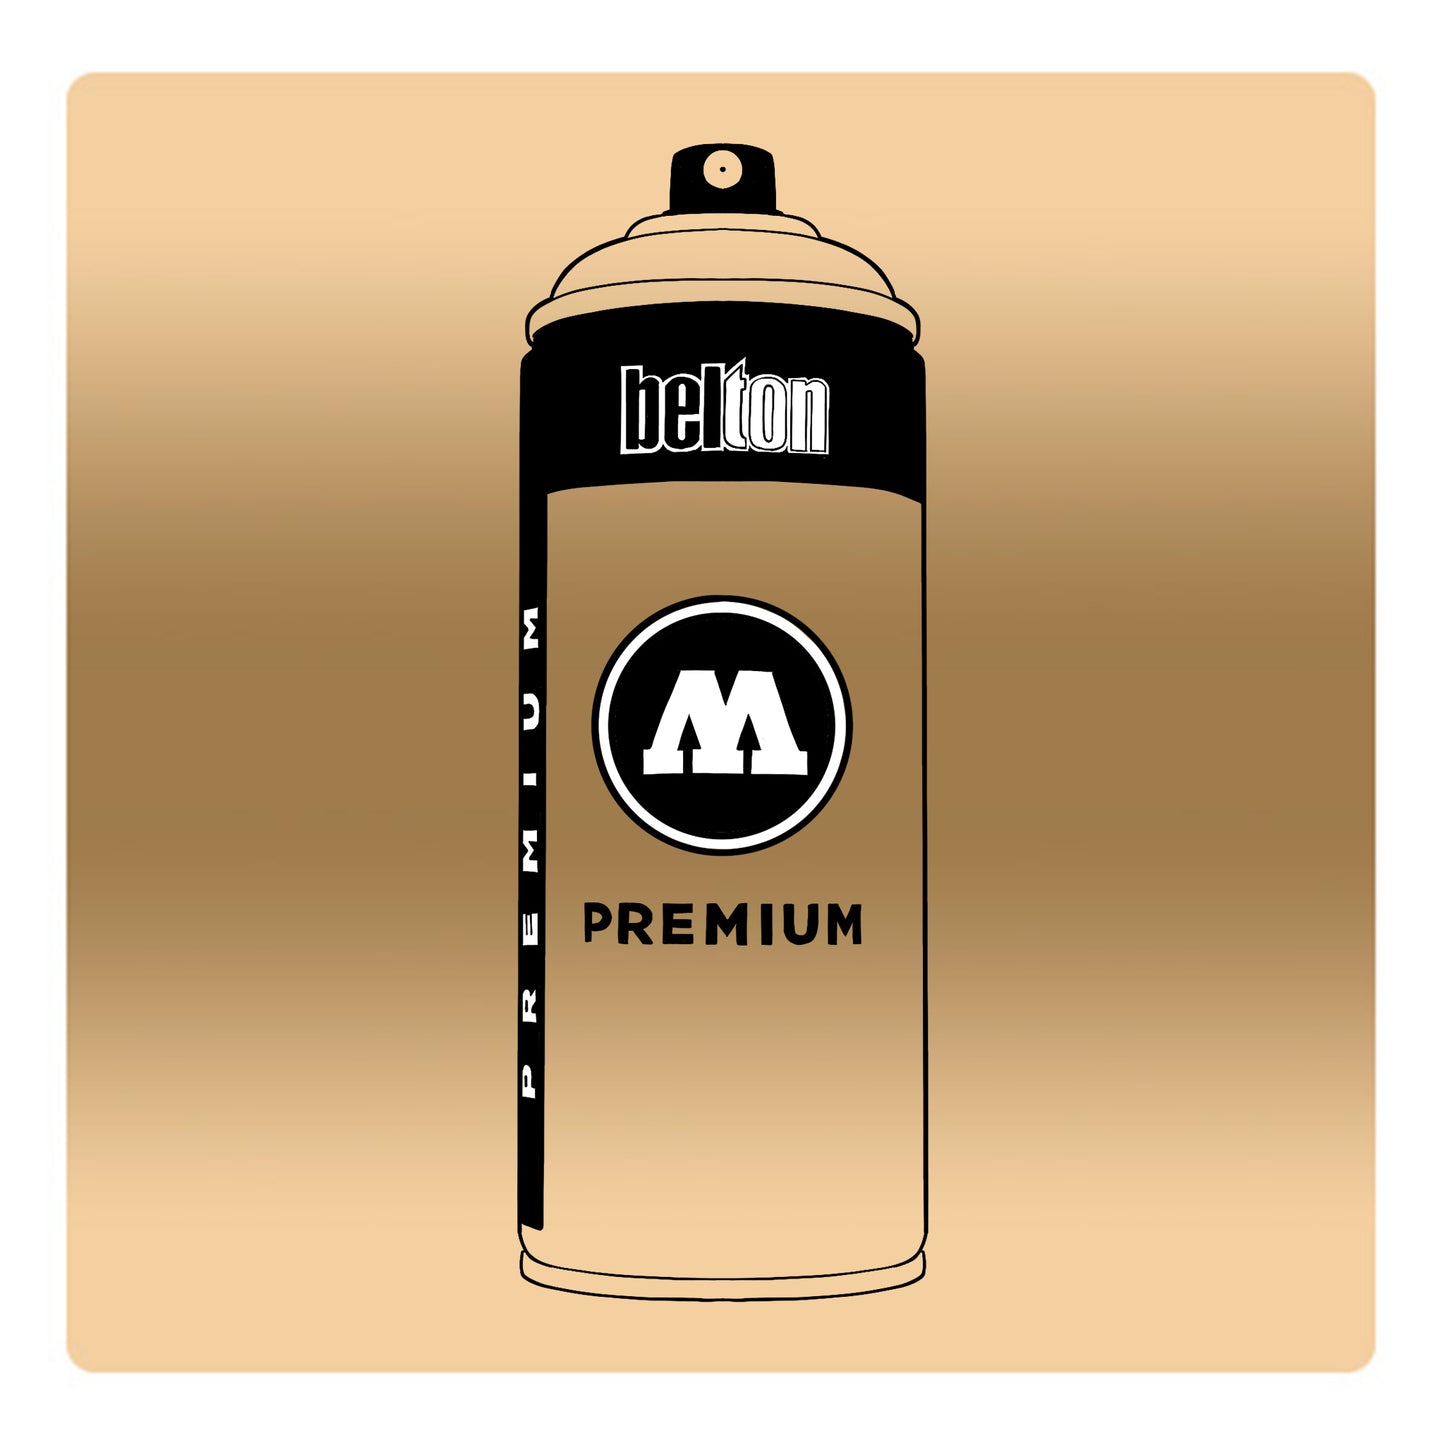 A black outline drawing of a gold gradient spray paint can with the words "belton","premium" and the letter"M" written on the face in black and white font. The background is a color swatch of the same gold gradient with a white border